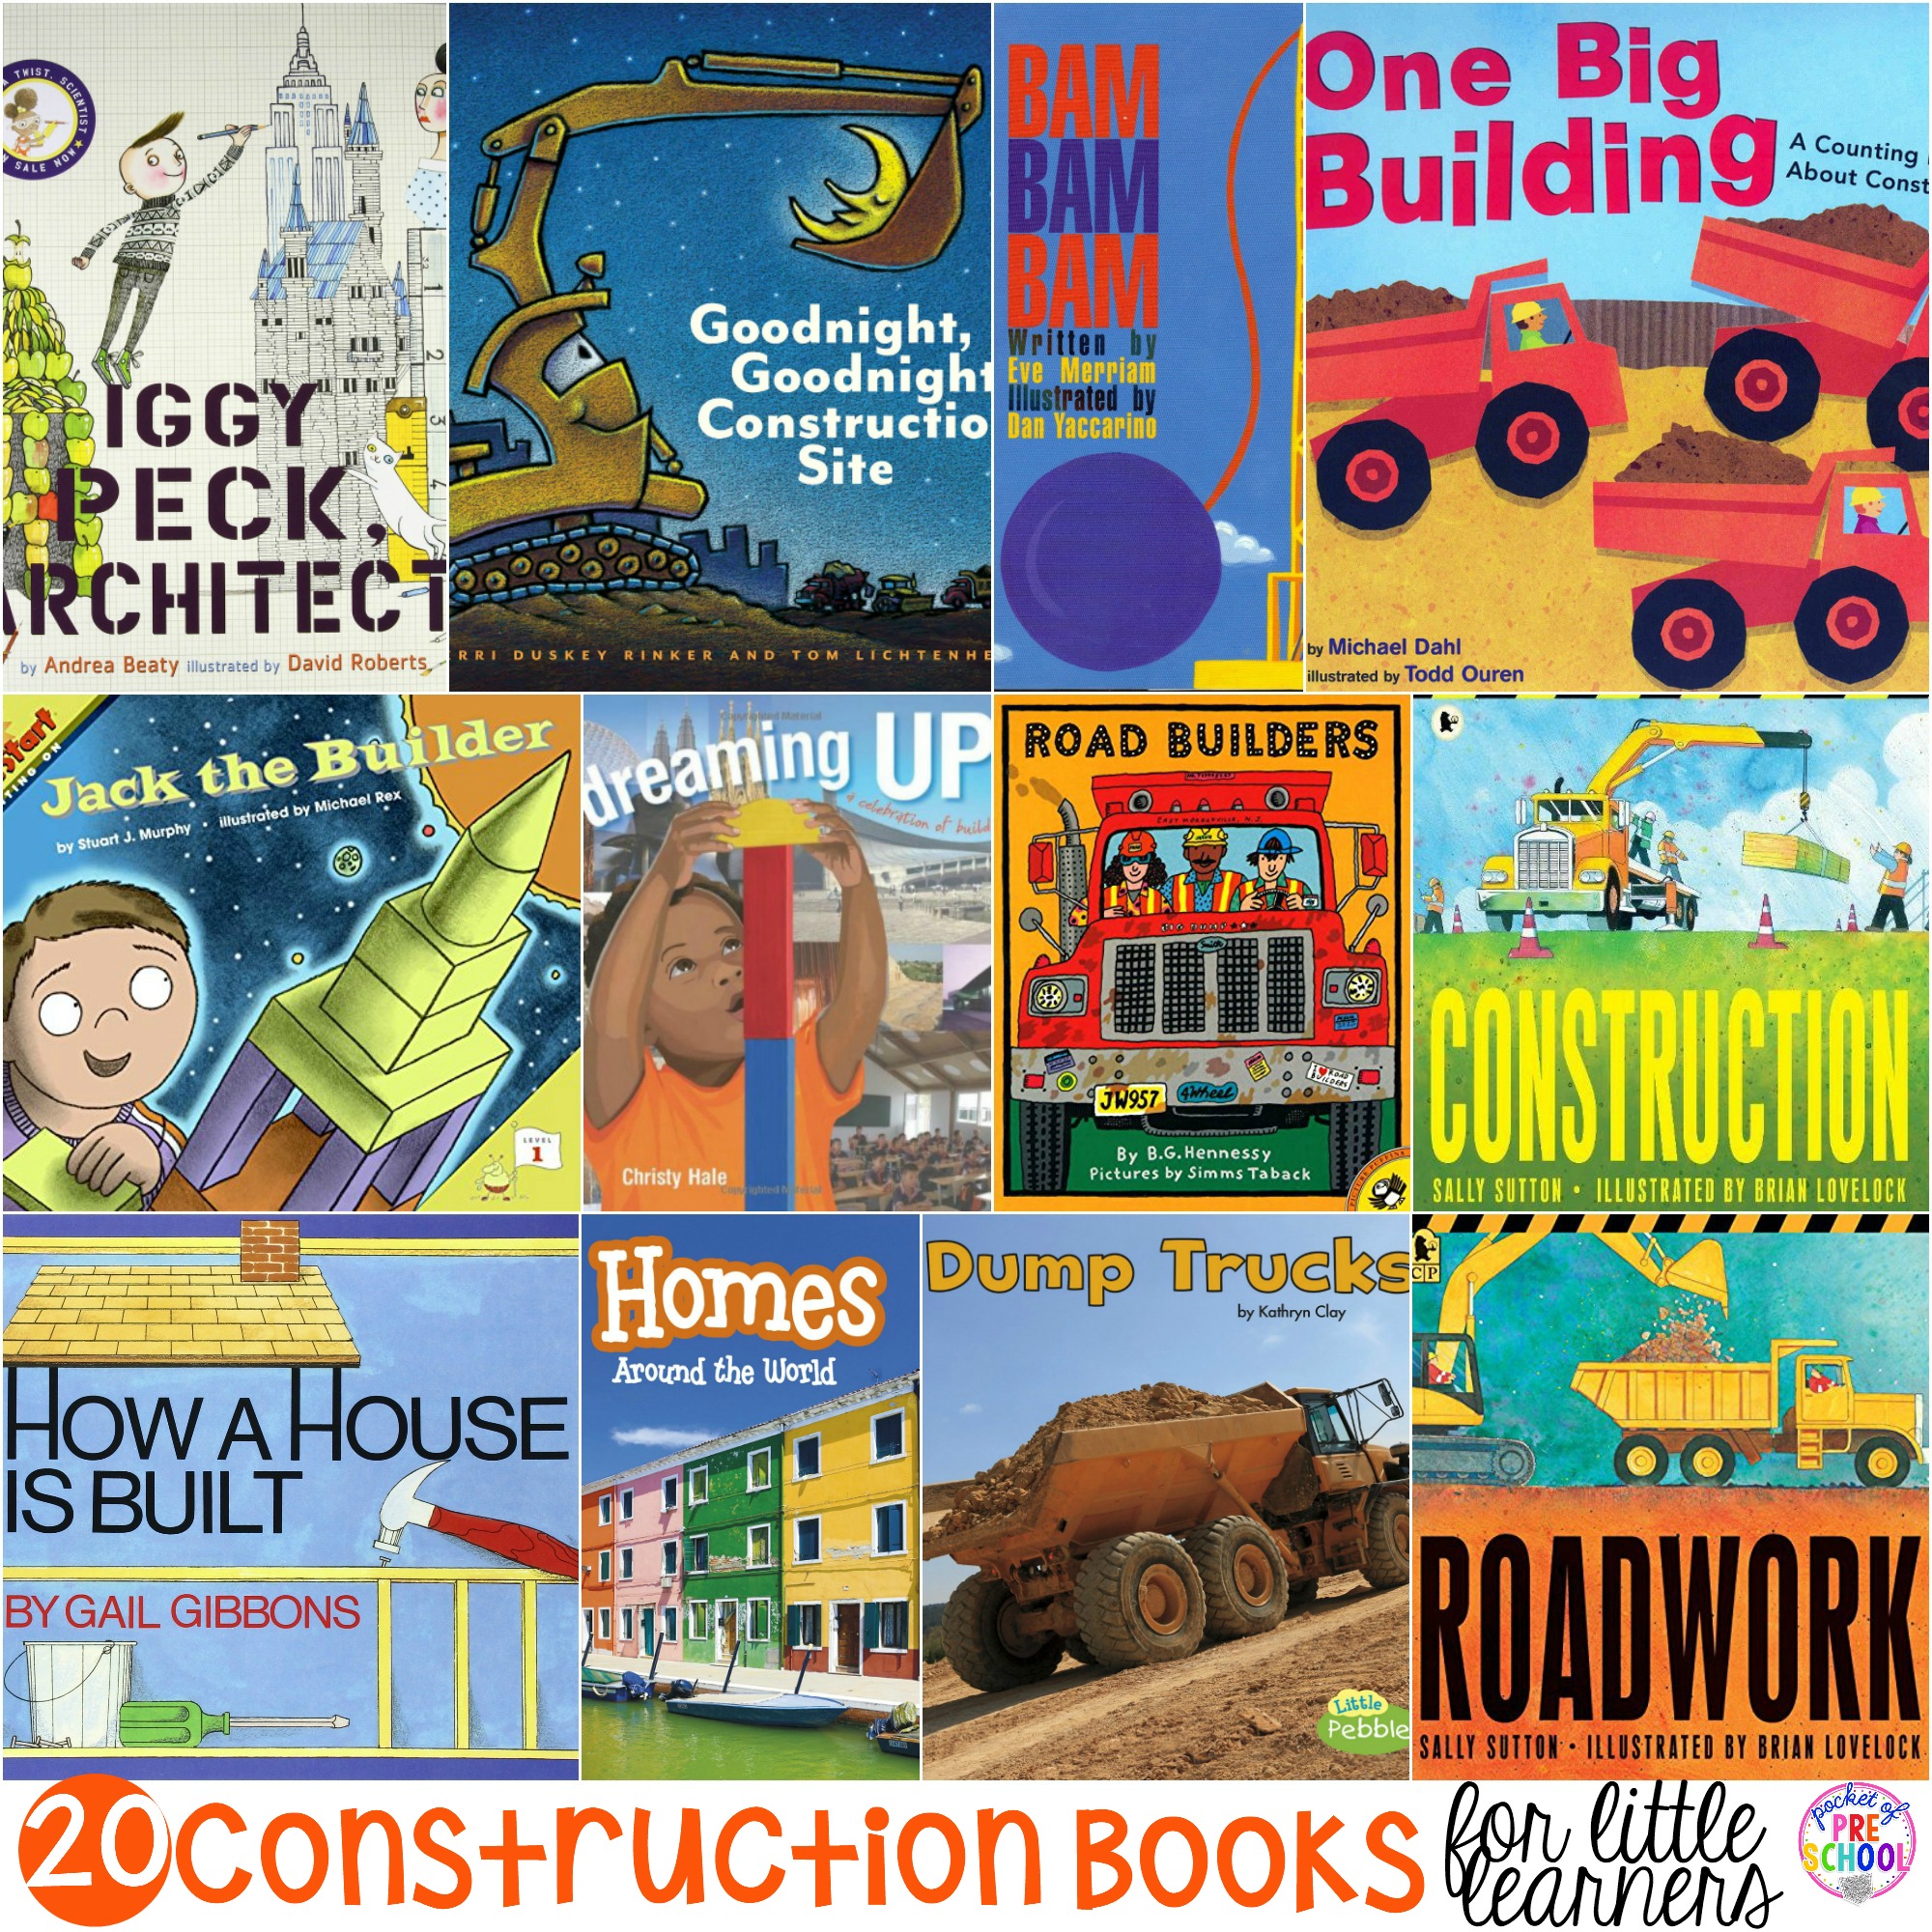 My top 20 Construction books for preschool, pre-k, and kindergarten (includes fiction and non-fiction).